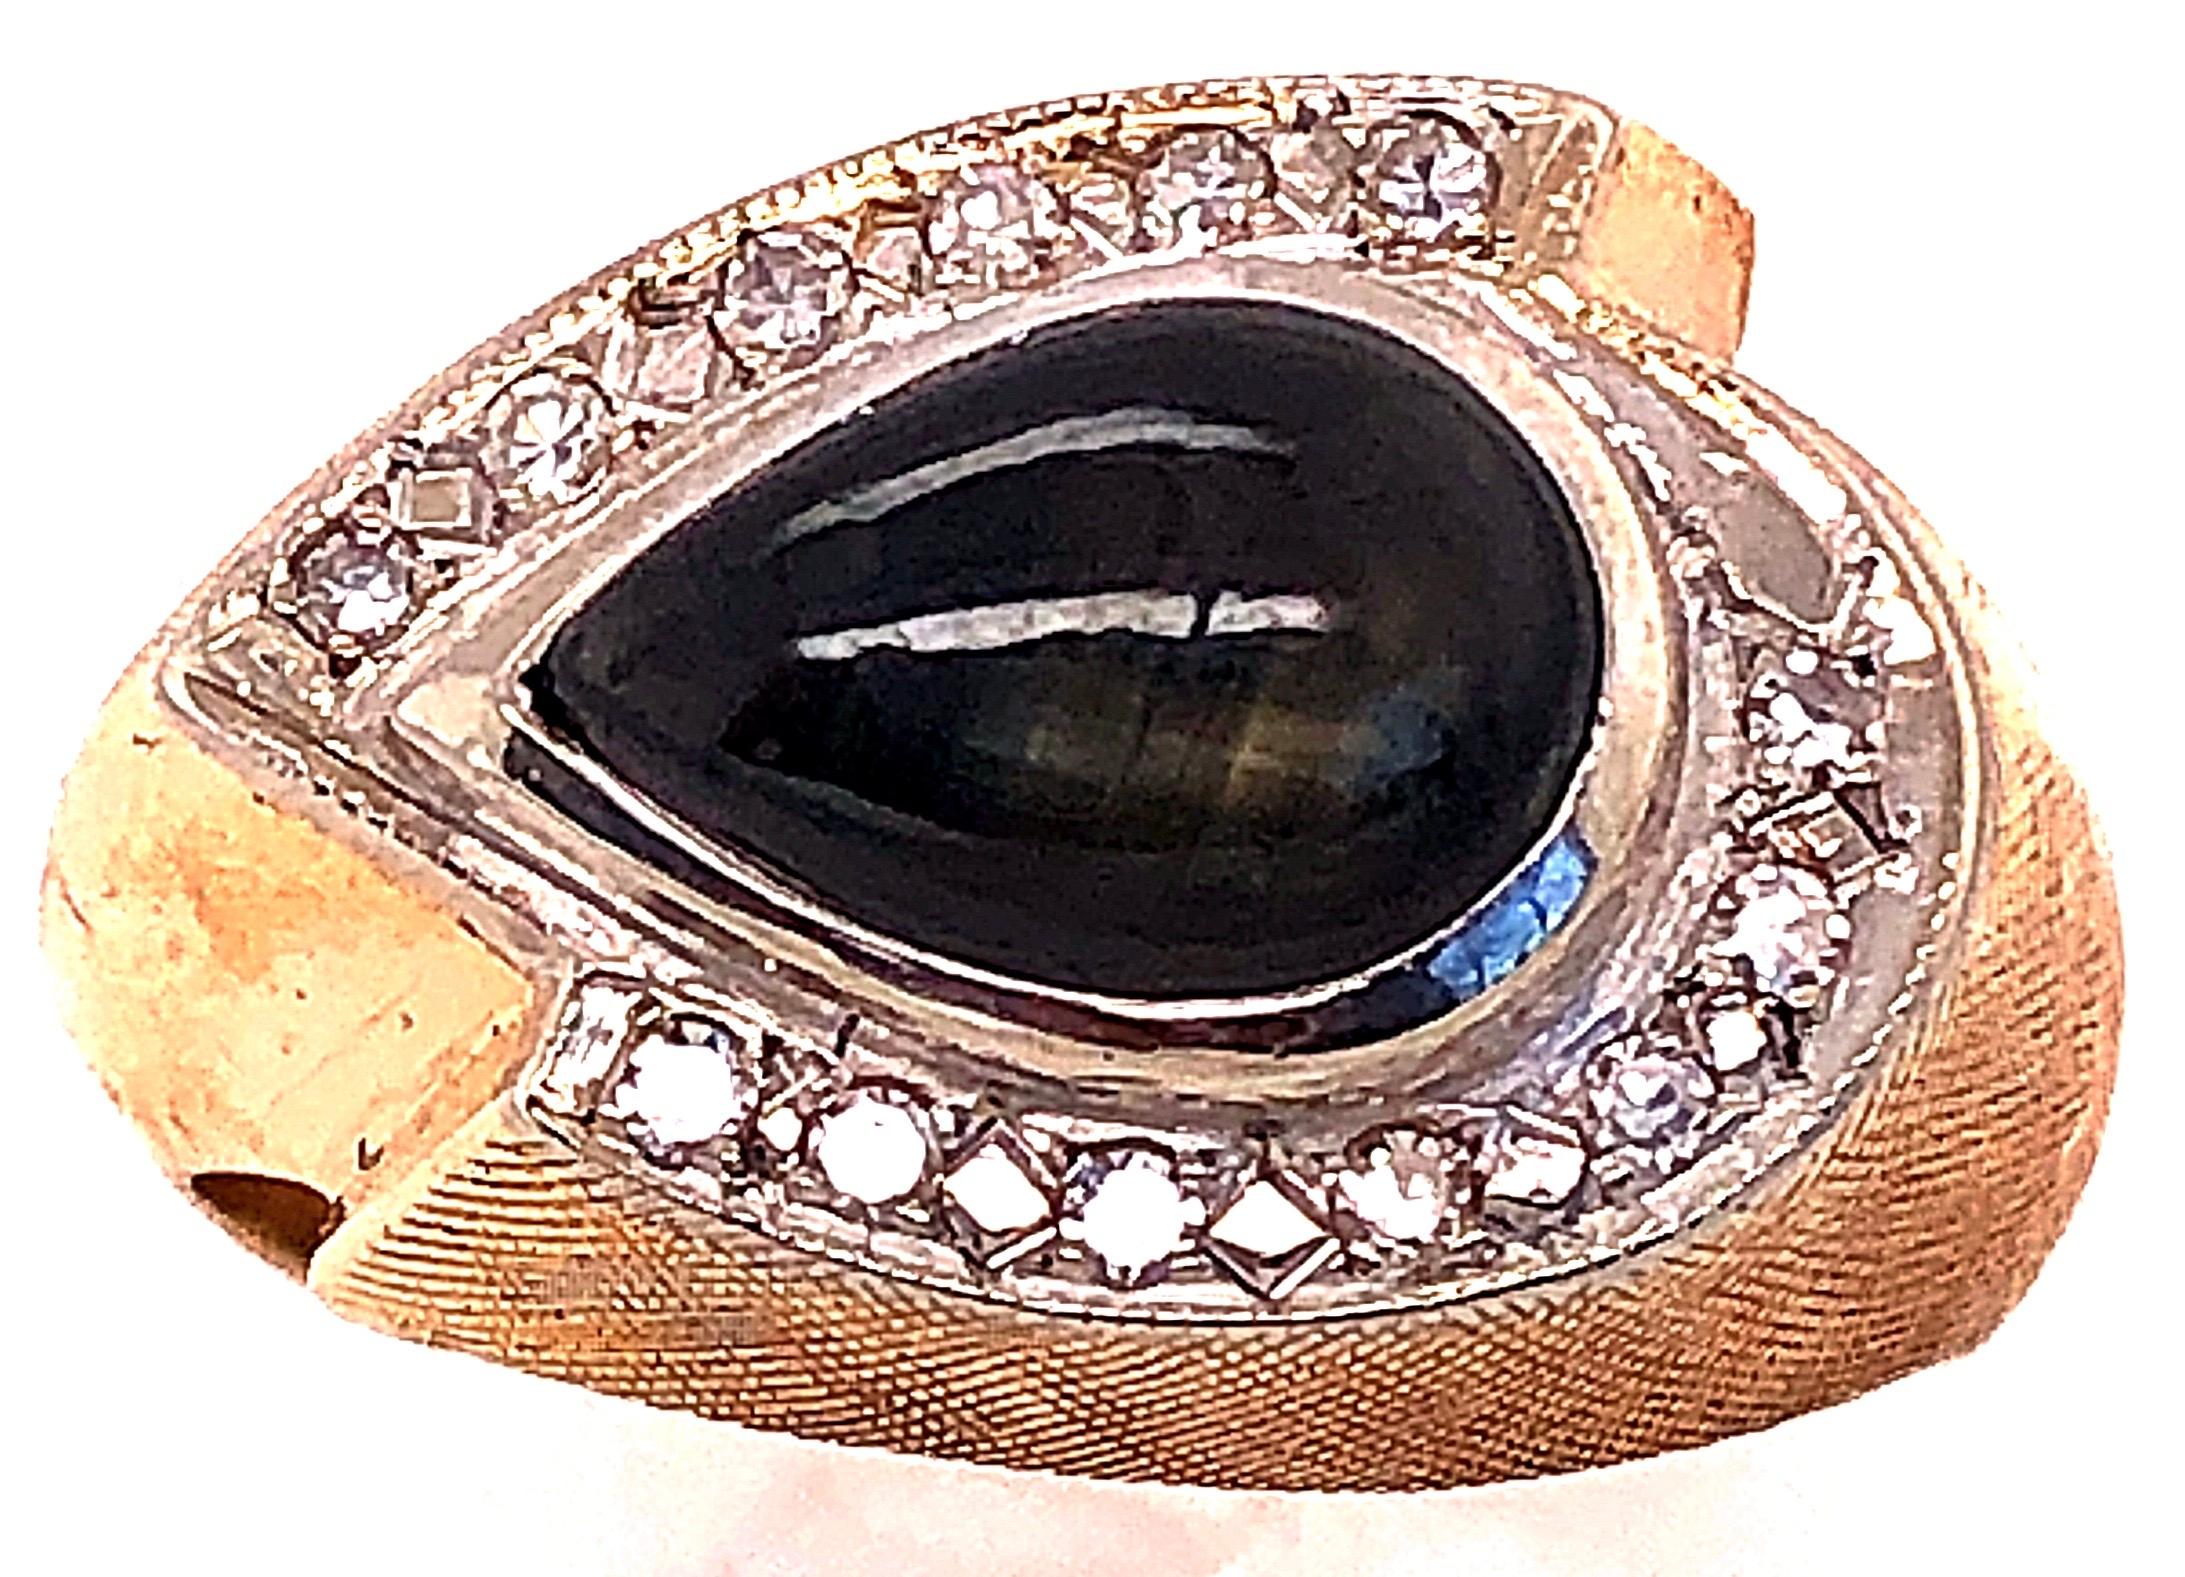 14 Karat Yellow and White Gold Sapphire Ring With Diamond Accents
0.26 total diamond weight.
6.92 mm x 9.80 mm dark blue sapphire 
Size 7
7.67 grams total weight.
13.79 ring height.
